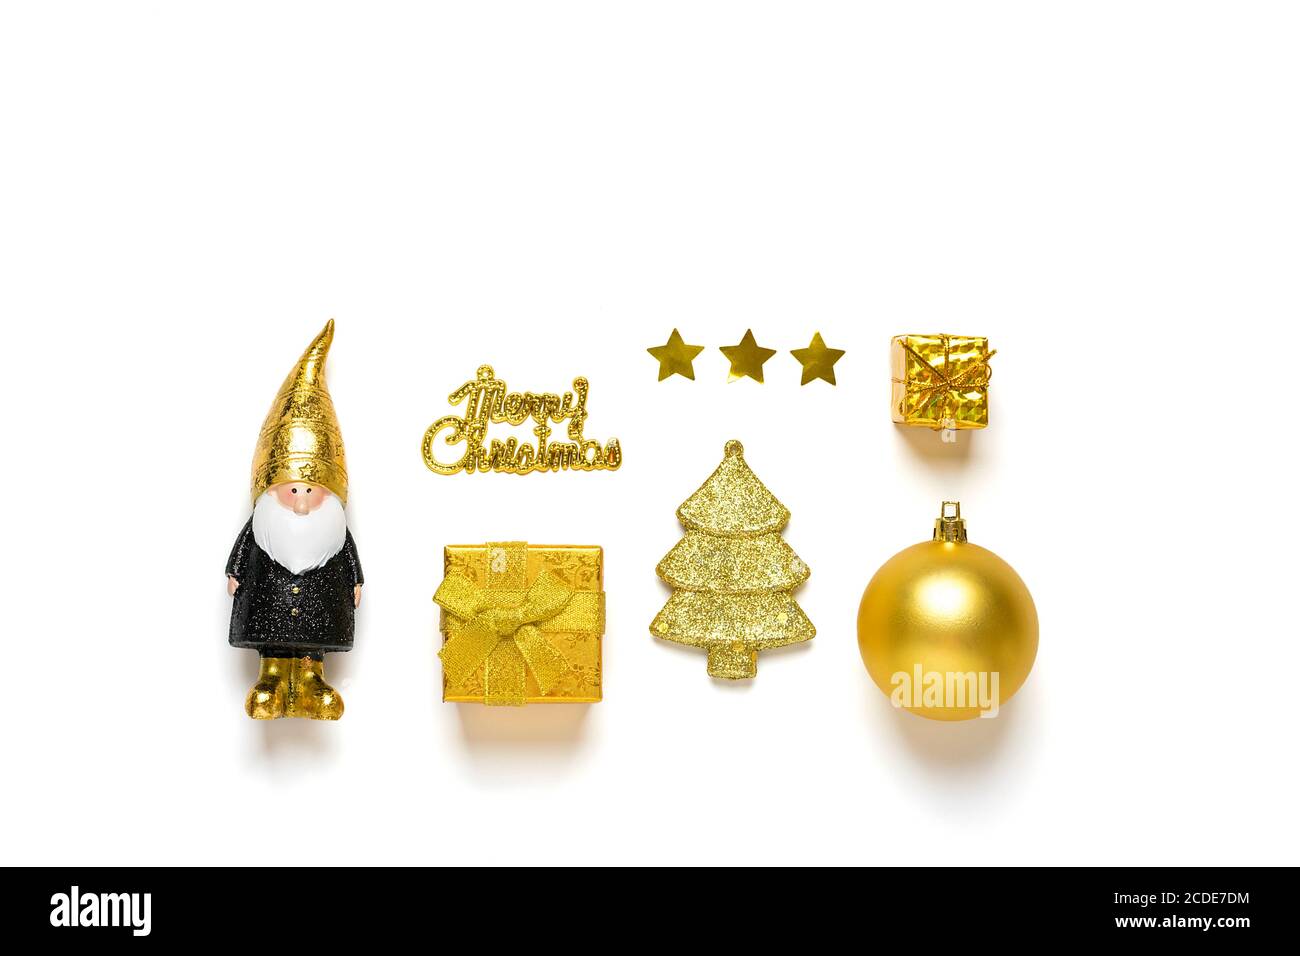 elf, gift box, bauble decorated with gold sparkle in black, golden color isolated on white background. Happy New Year, Merry Christmas concept Holiday Stock Photo